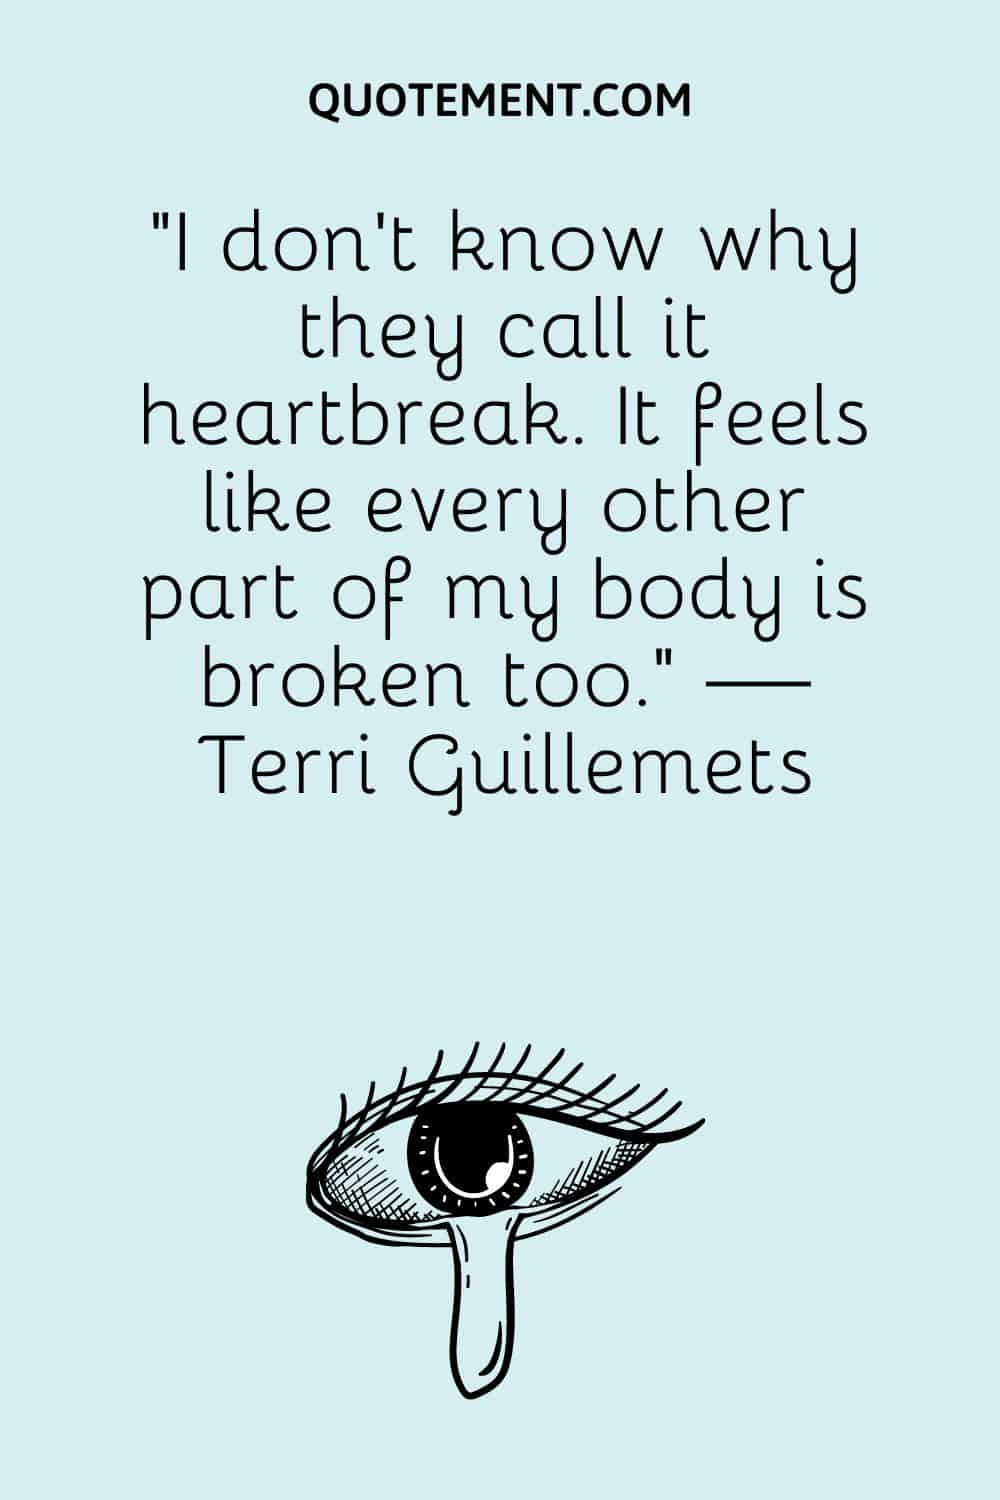 “I don’t know why they call it heartbreak. It feels like every other part of my body is broken too.” — Terri Guillemets